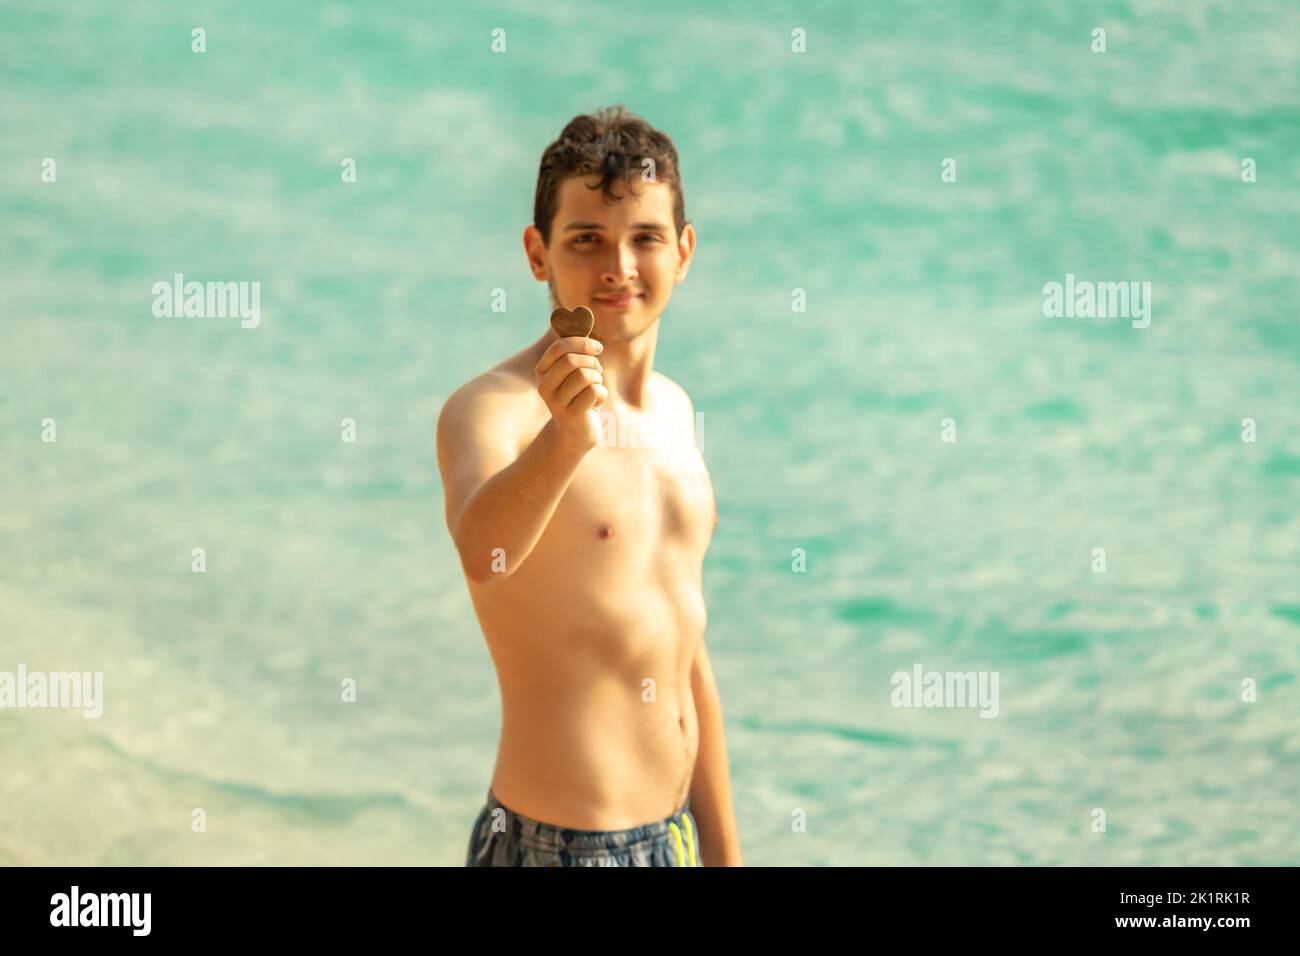 The boy on the beach near the sea with a stone like the heart in his hand Stock Photo